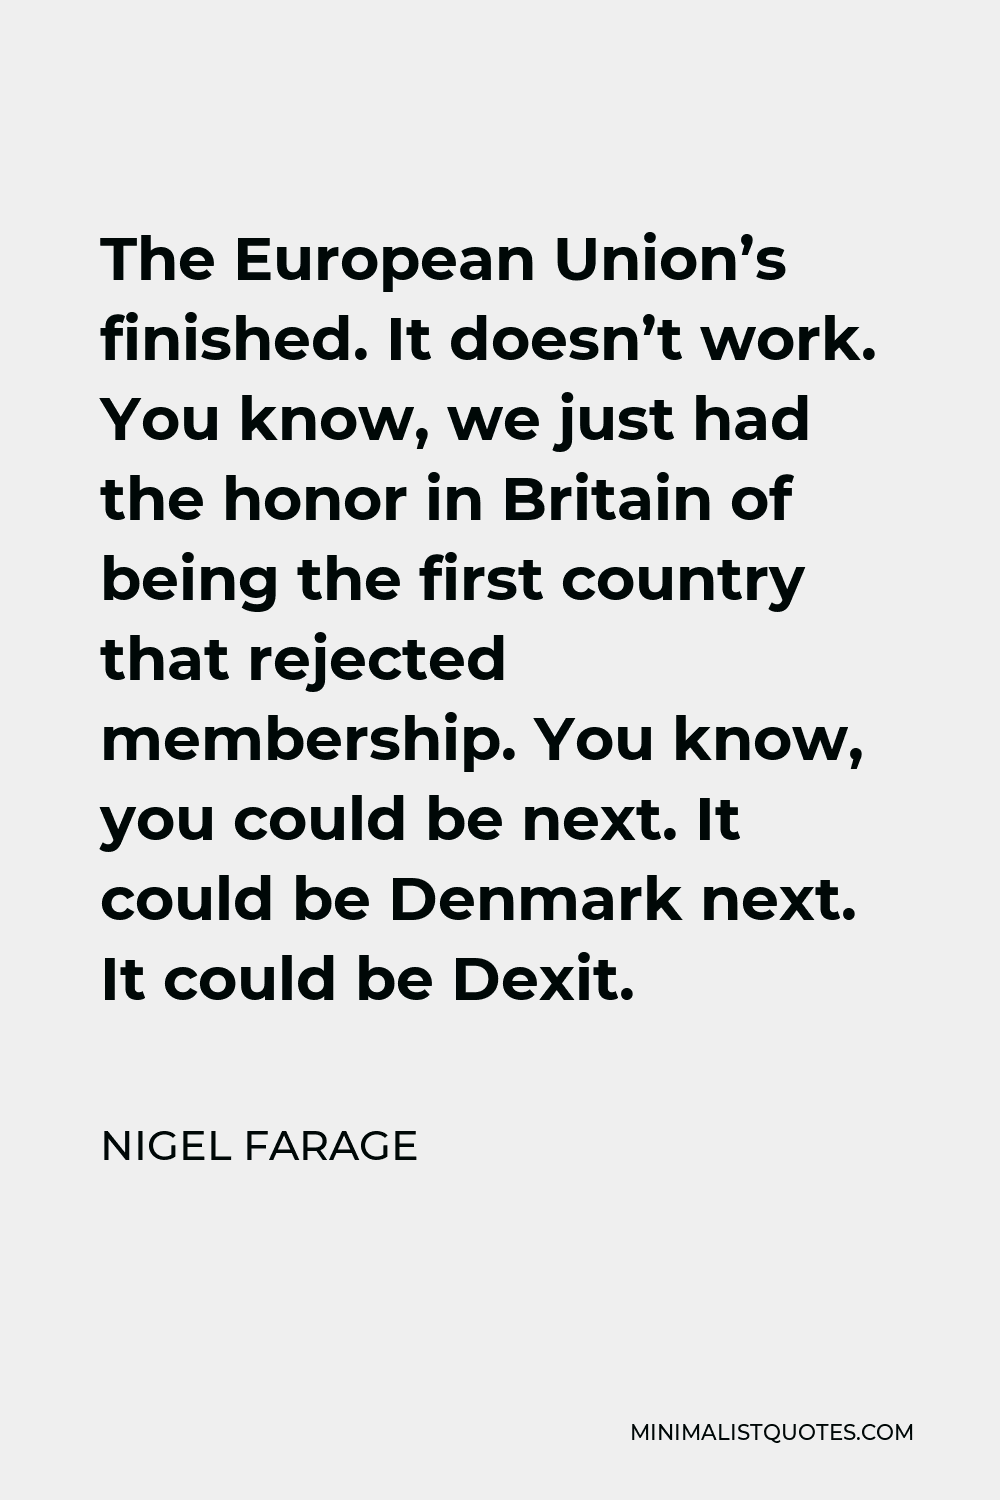 Nigel Farage Quote - The European Union’s finished. It doesn’t work. You know, we just had the honor in Britain of being the first country that rejected membership. You know, you could be next. It could be Denmark next. It could be Dexit.